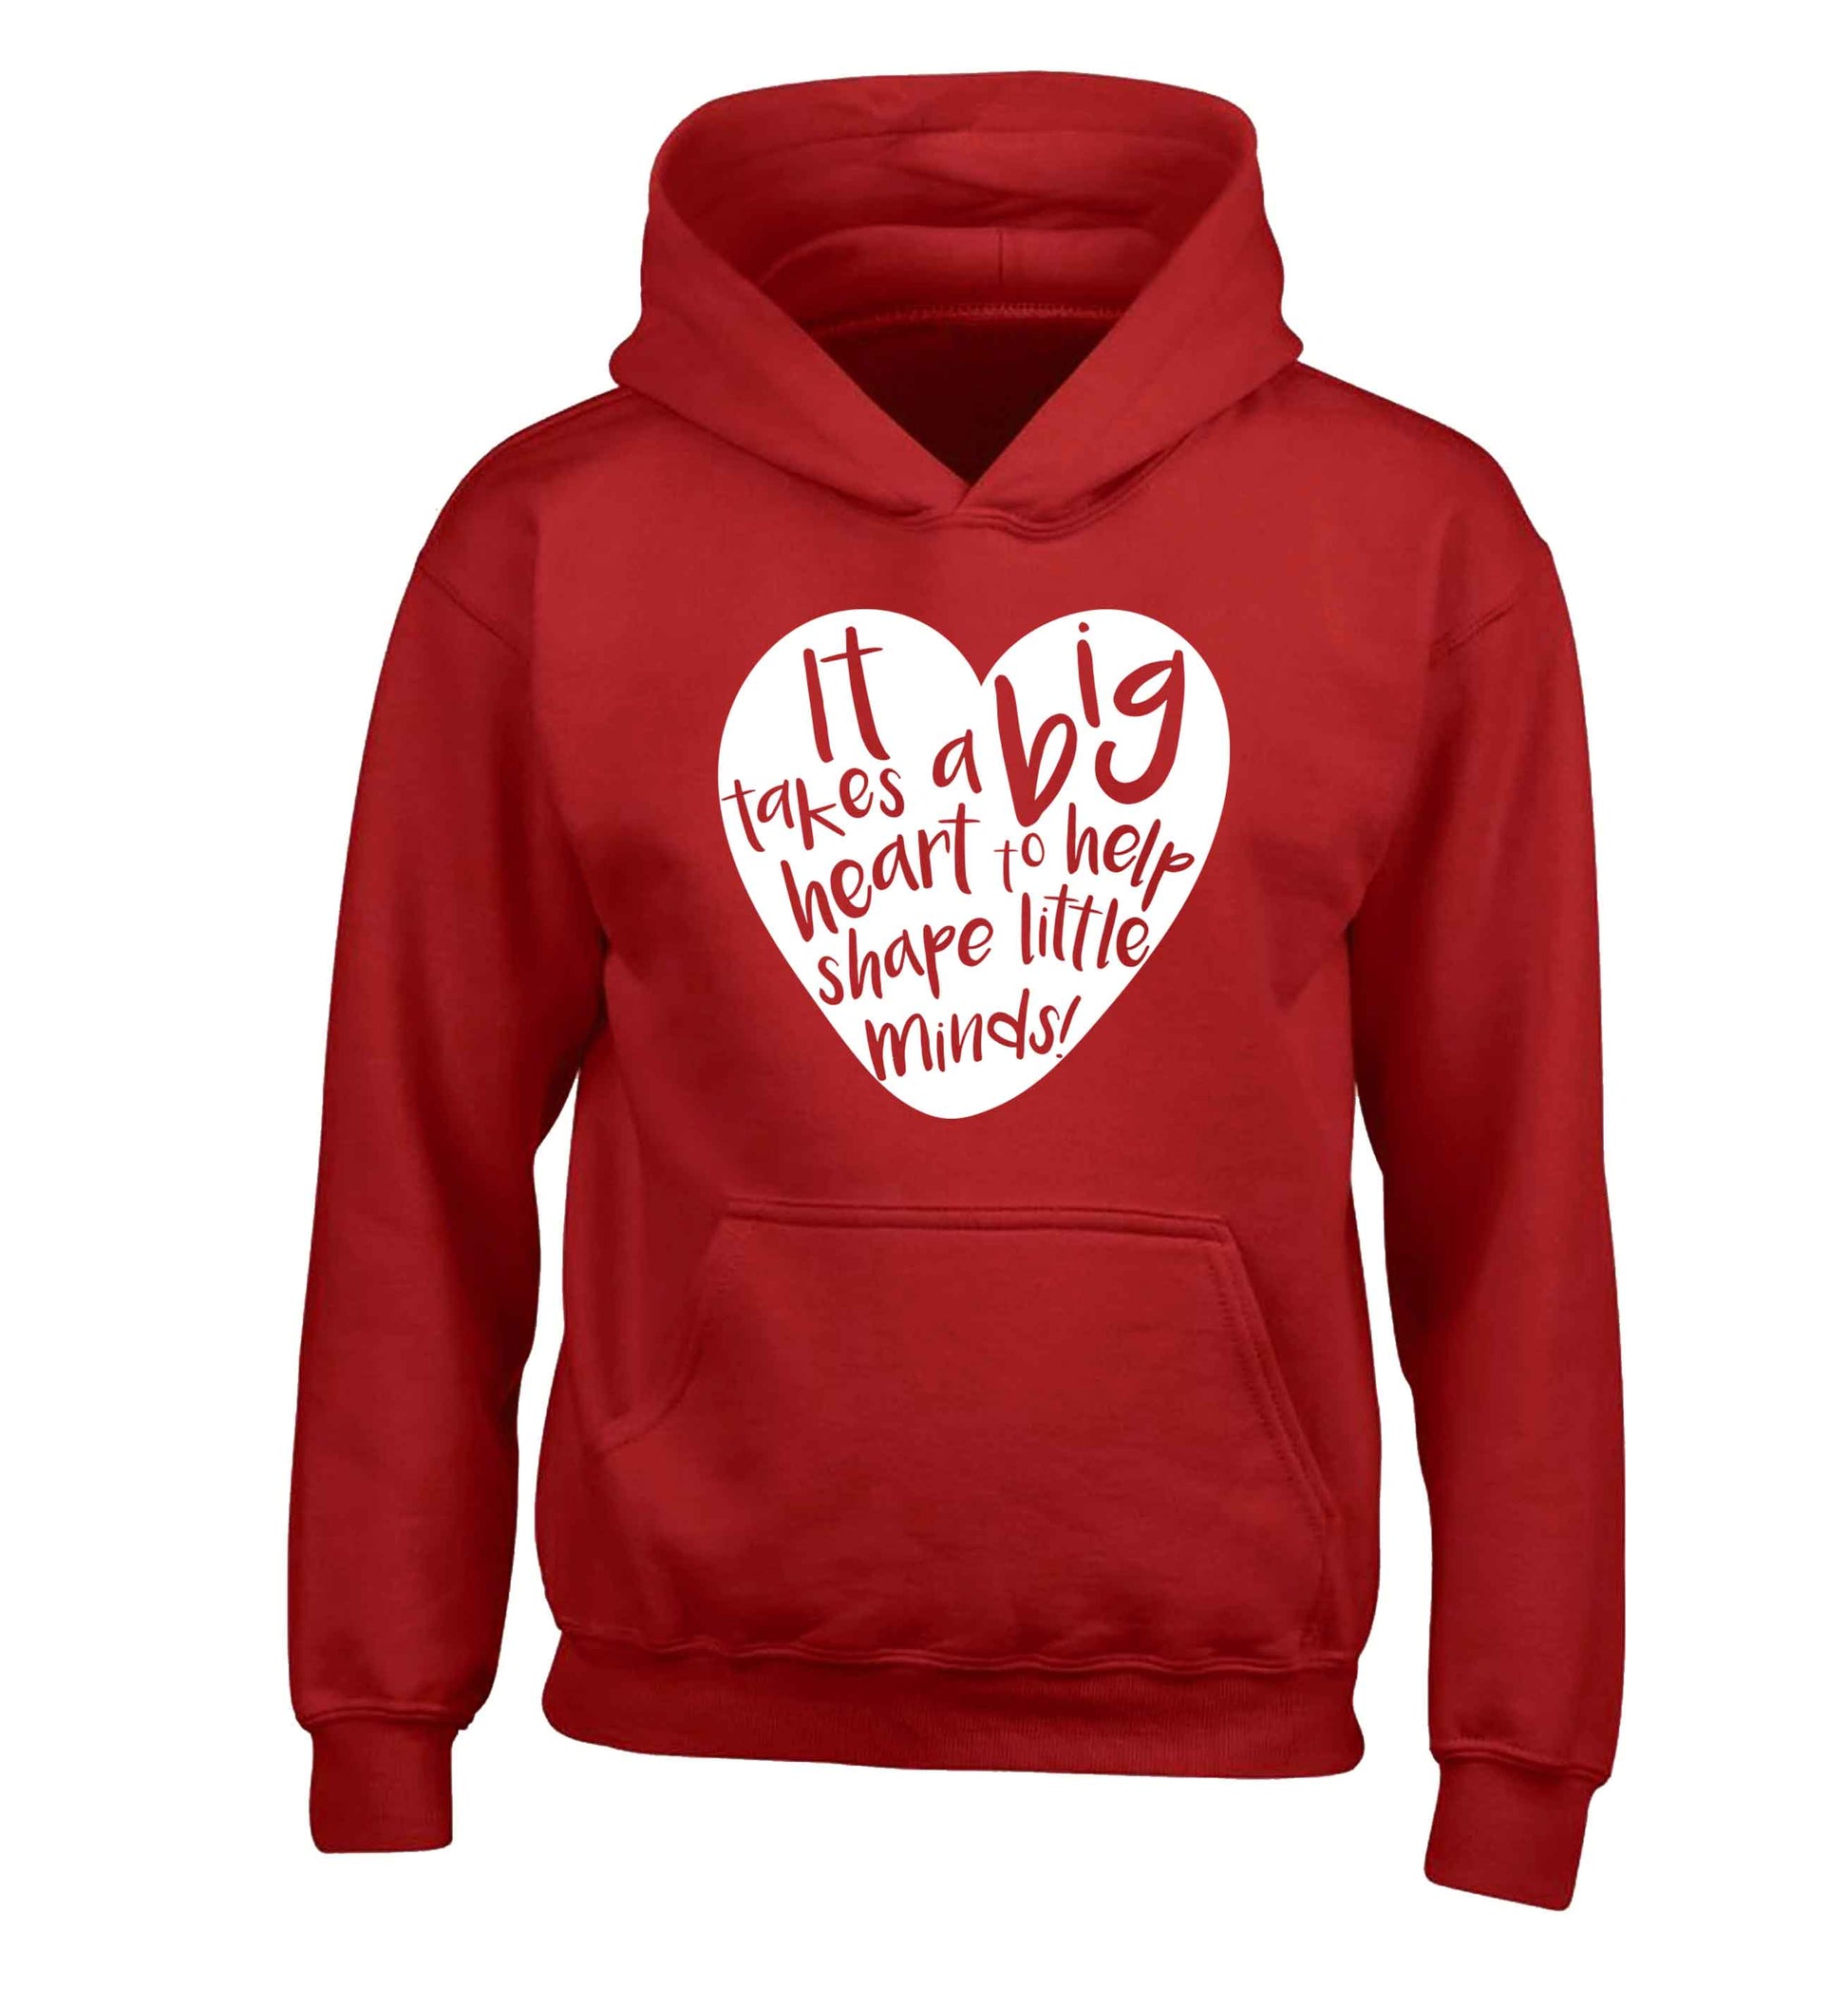 It takes a big heart to help shape little minds children's red hoodie 12-13 Years